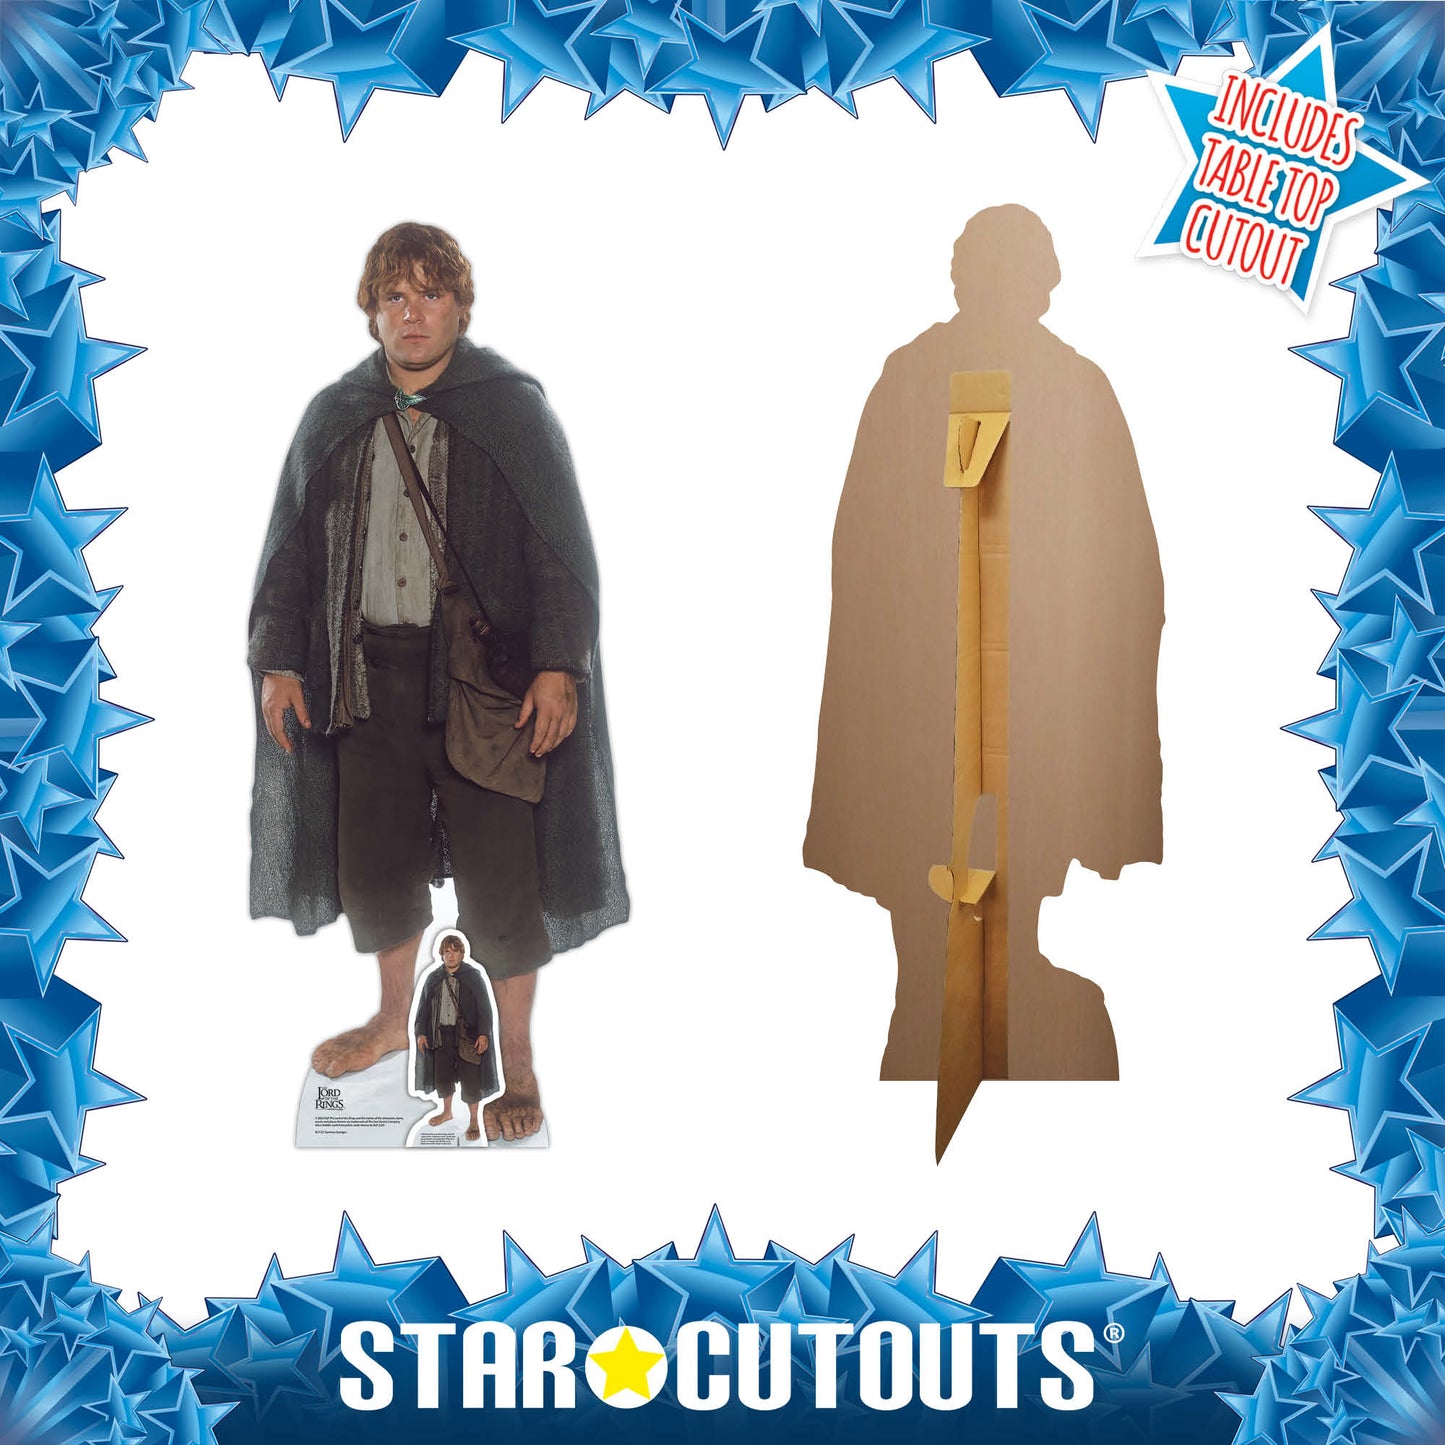 SC4127 Samwise Gamgee  Lord of the Rings Cardboard Cut Out Height 135cm